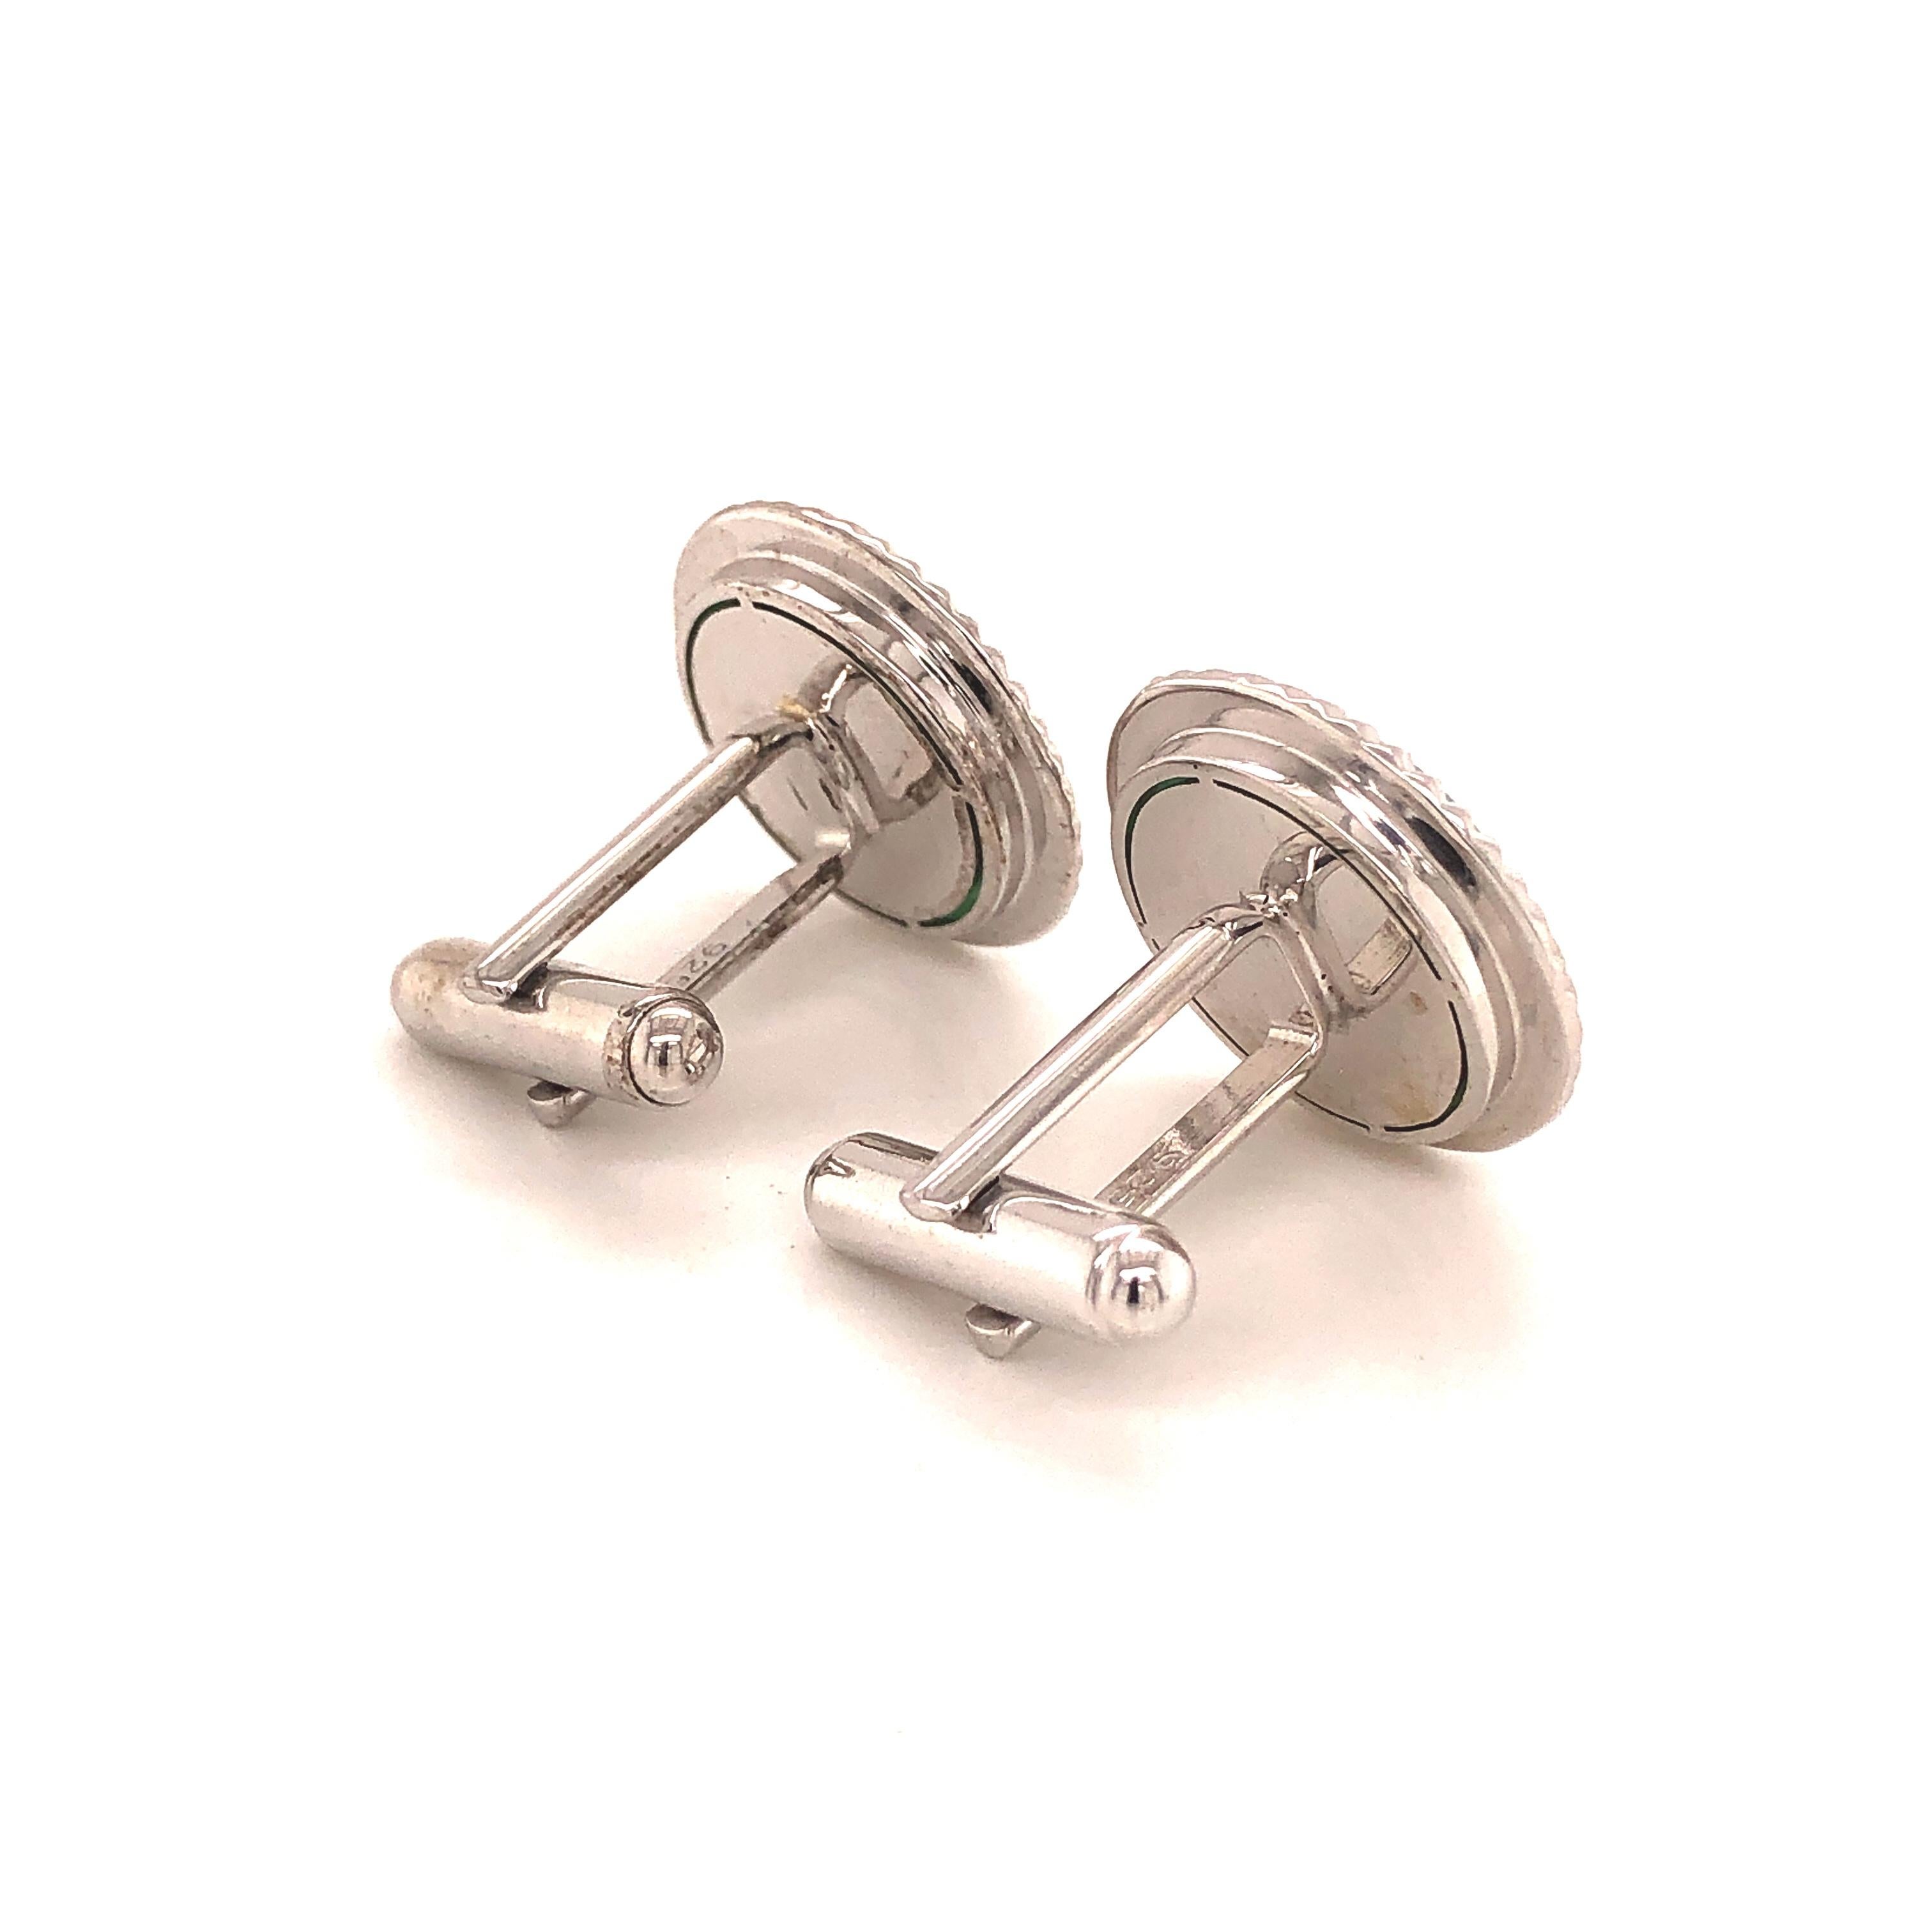 These exquisite pair of contemporary abstract agate cameo carving cufflinks made in sterling silver is delight for the wearer! Hand carved in the relief of a natural agate these unisex cufflinks are a contemporary expression for the modern man or